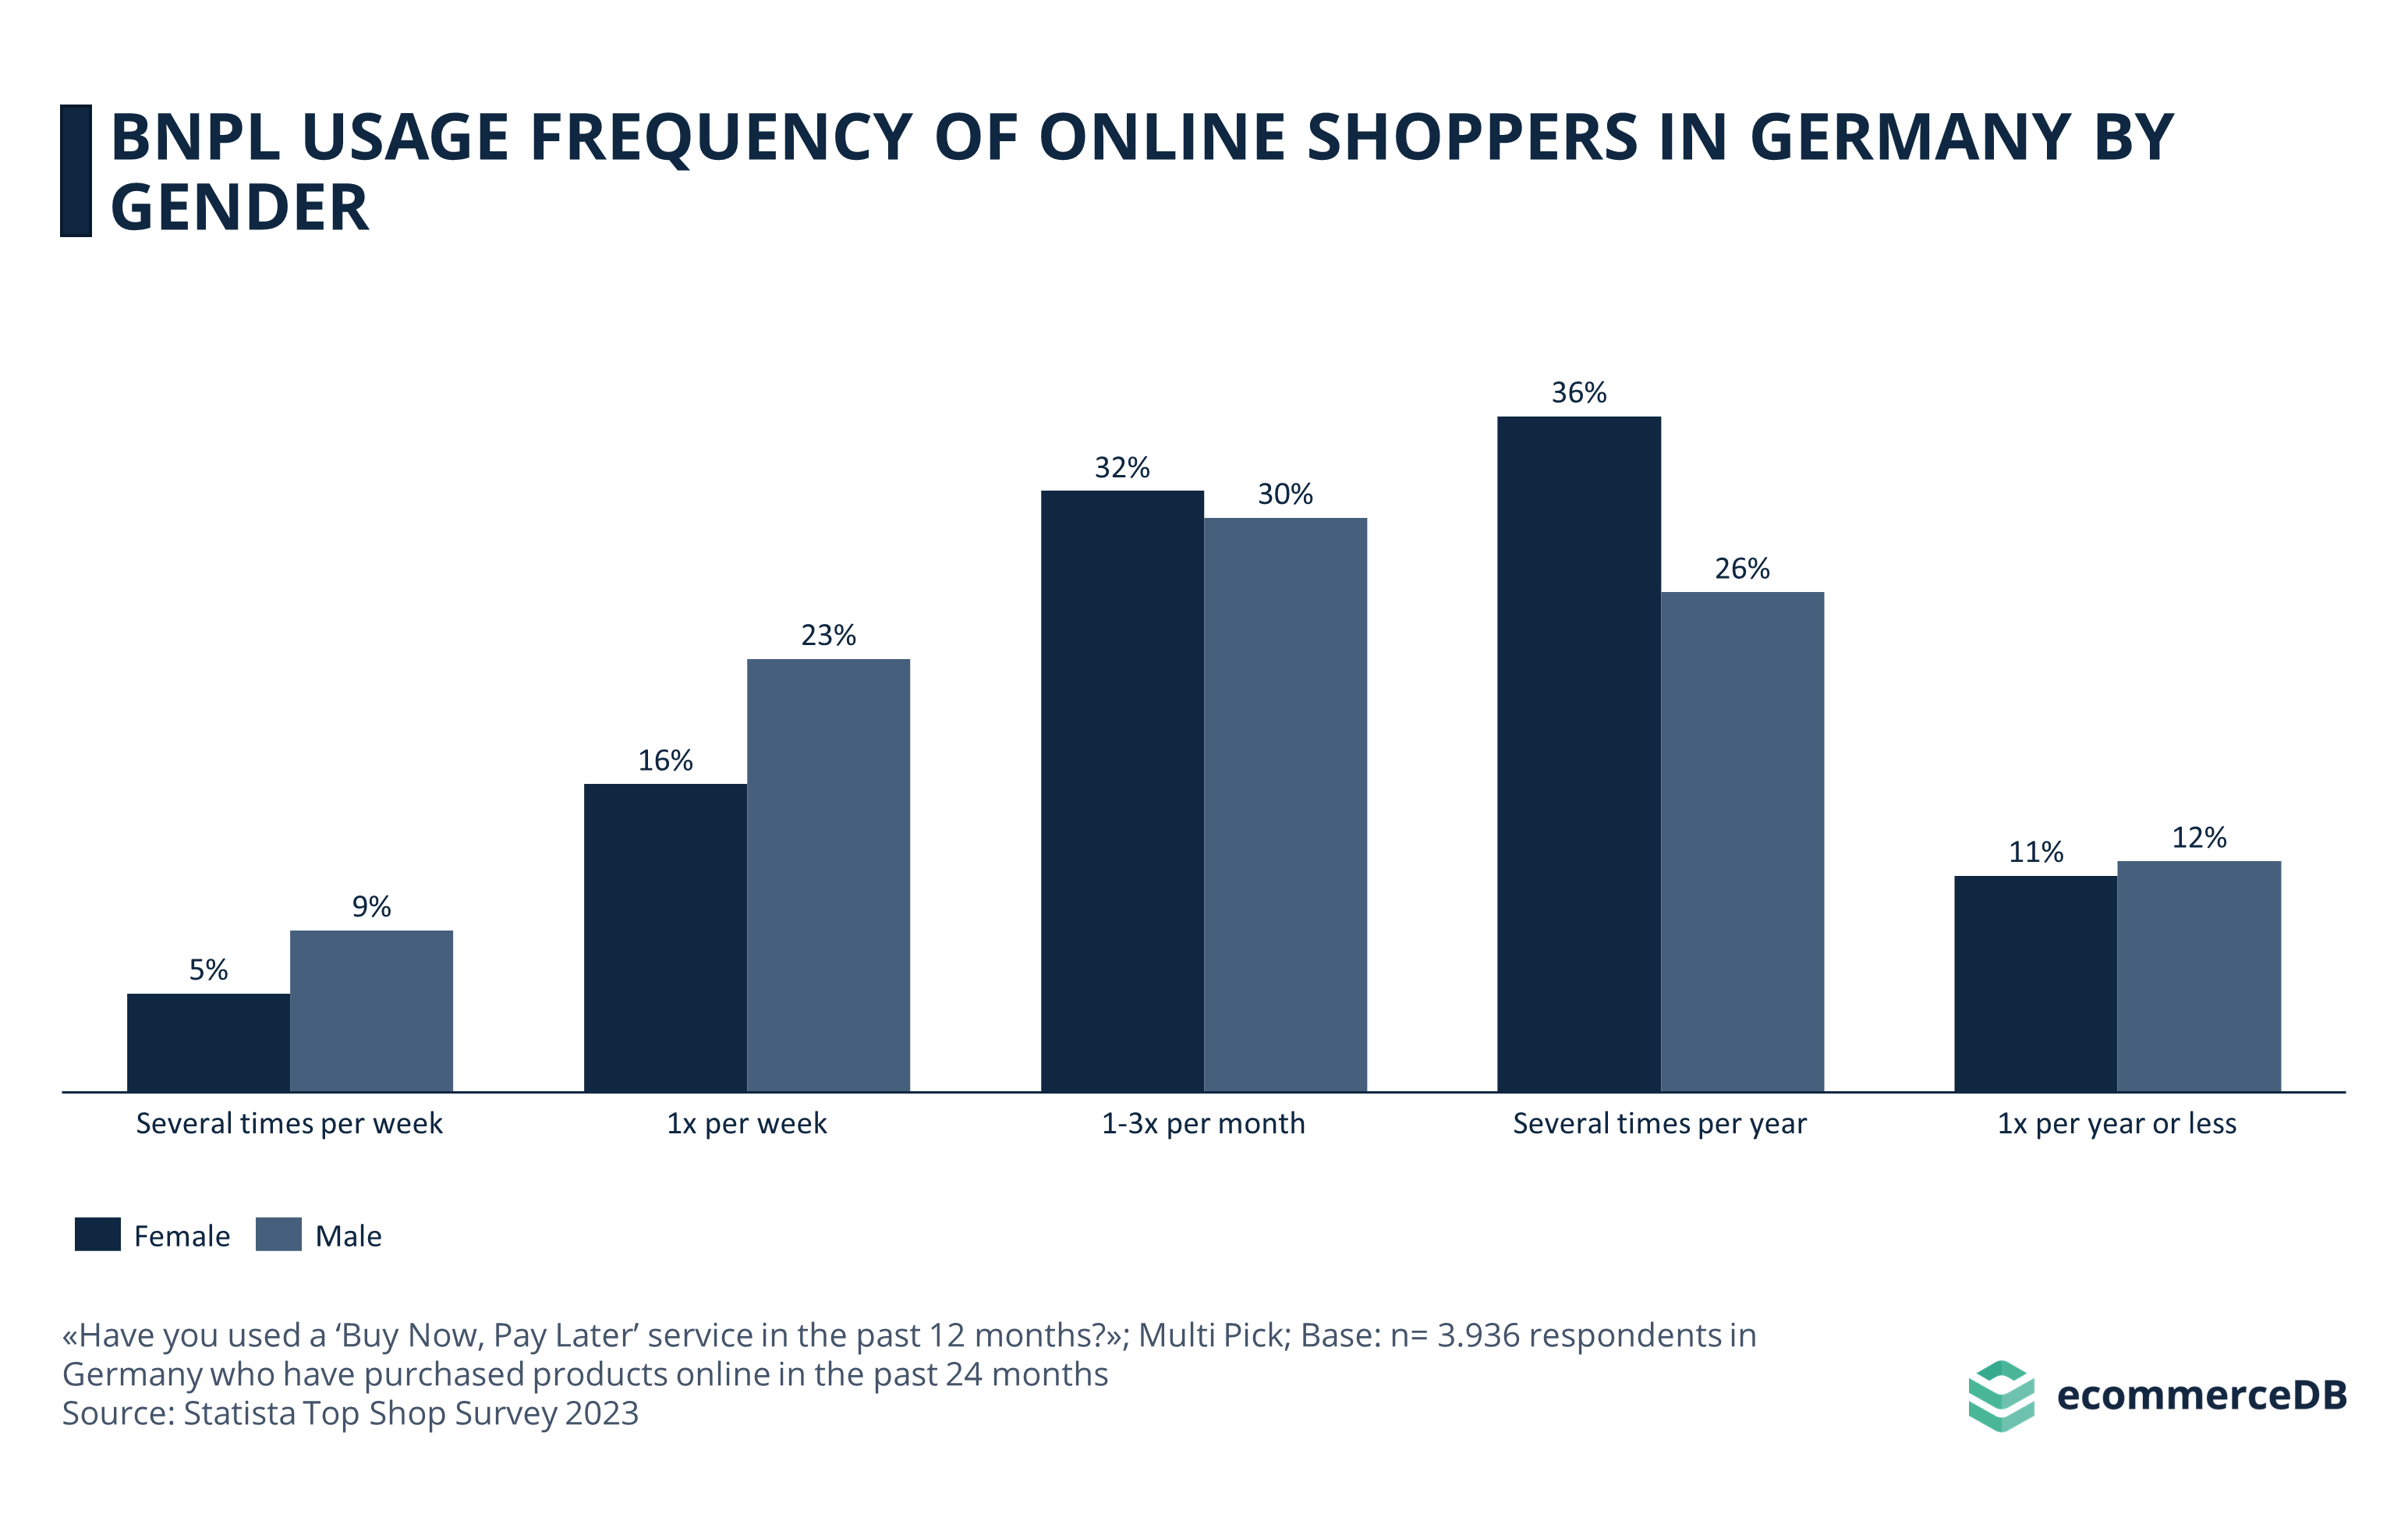 BNPL Usage Frequency of Online Shoppers in Germany by Gender